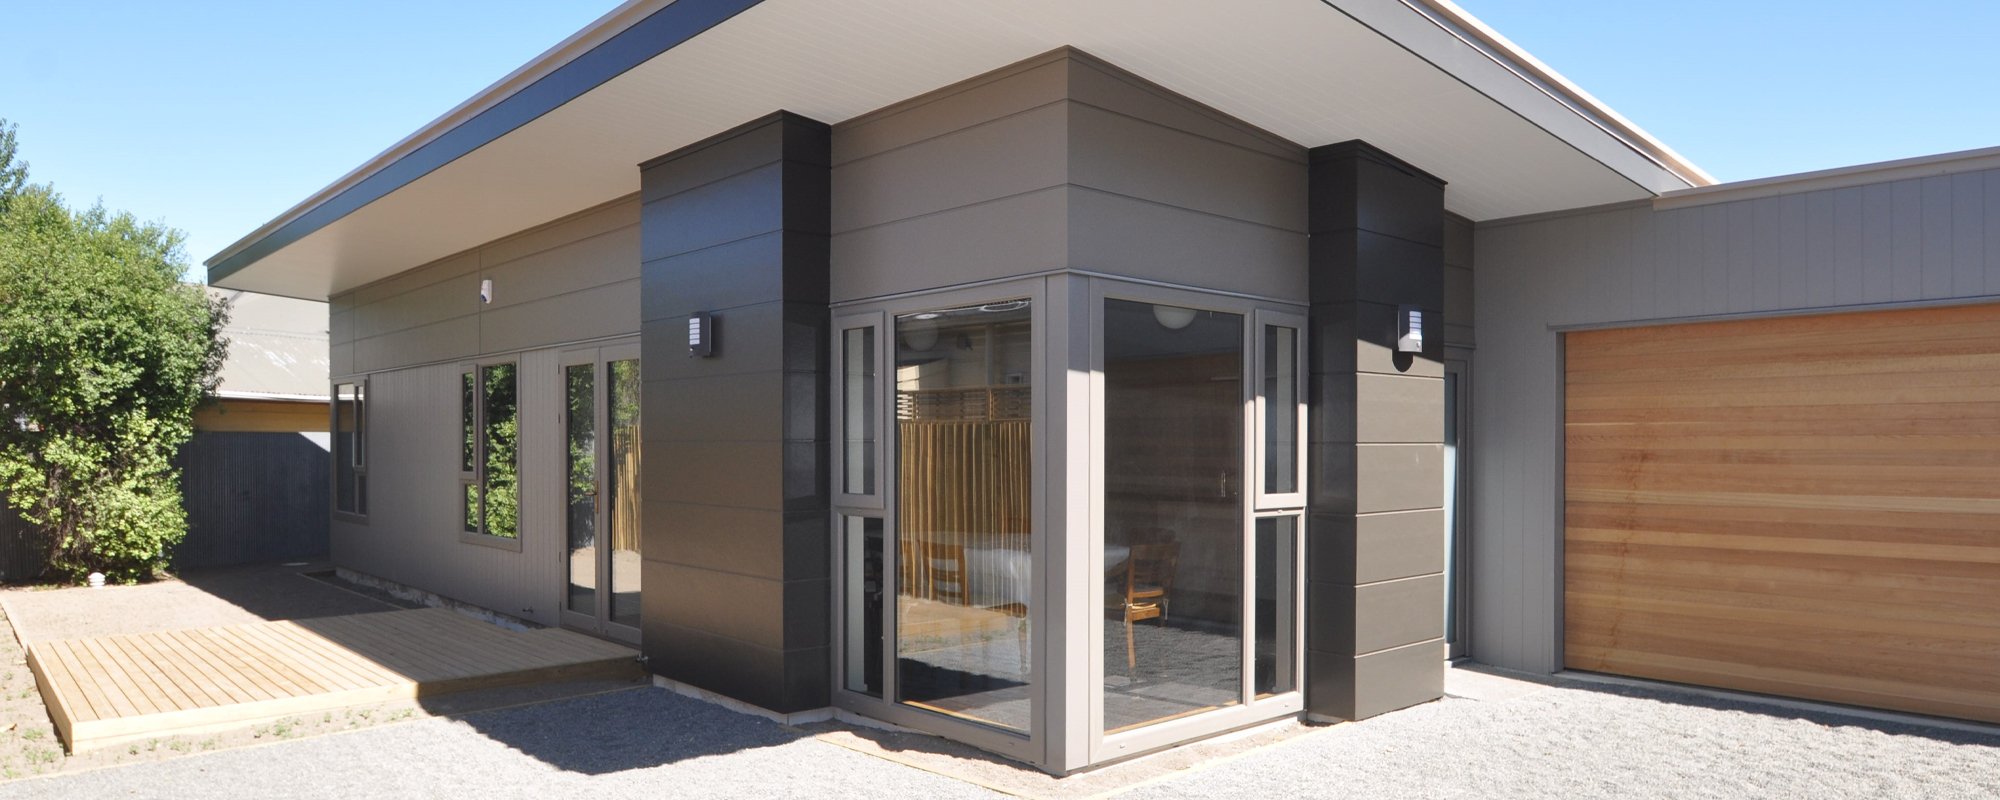 Modern grey, black and wooden house with grey uPVC window and door frames